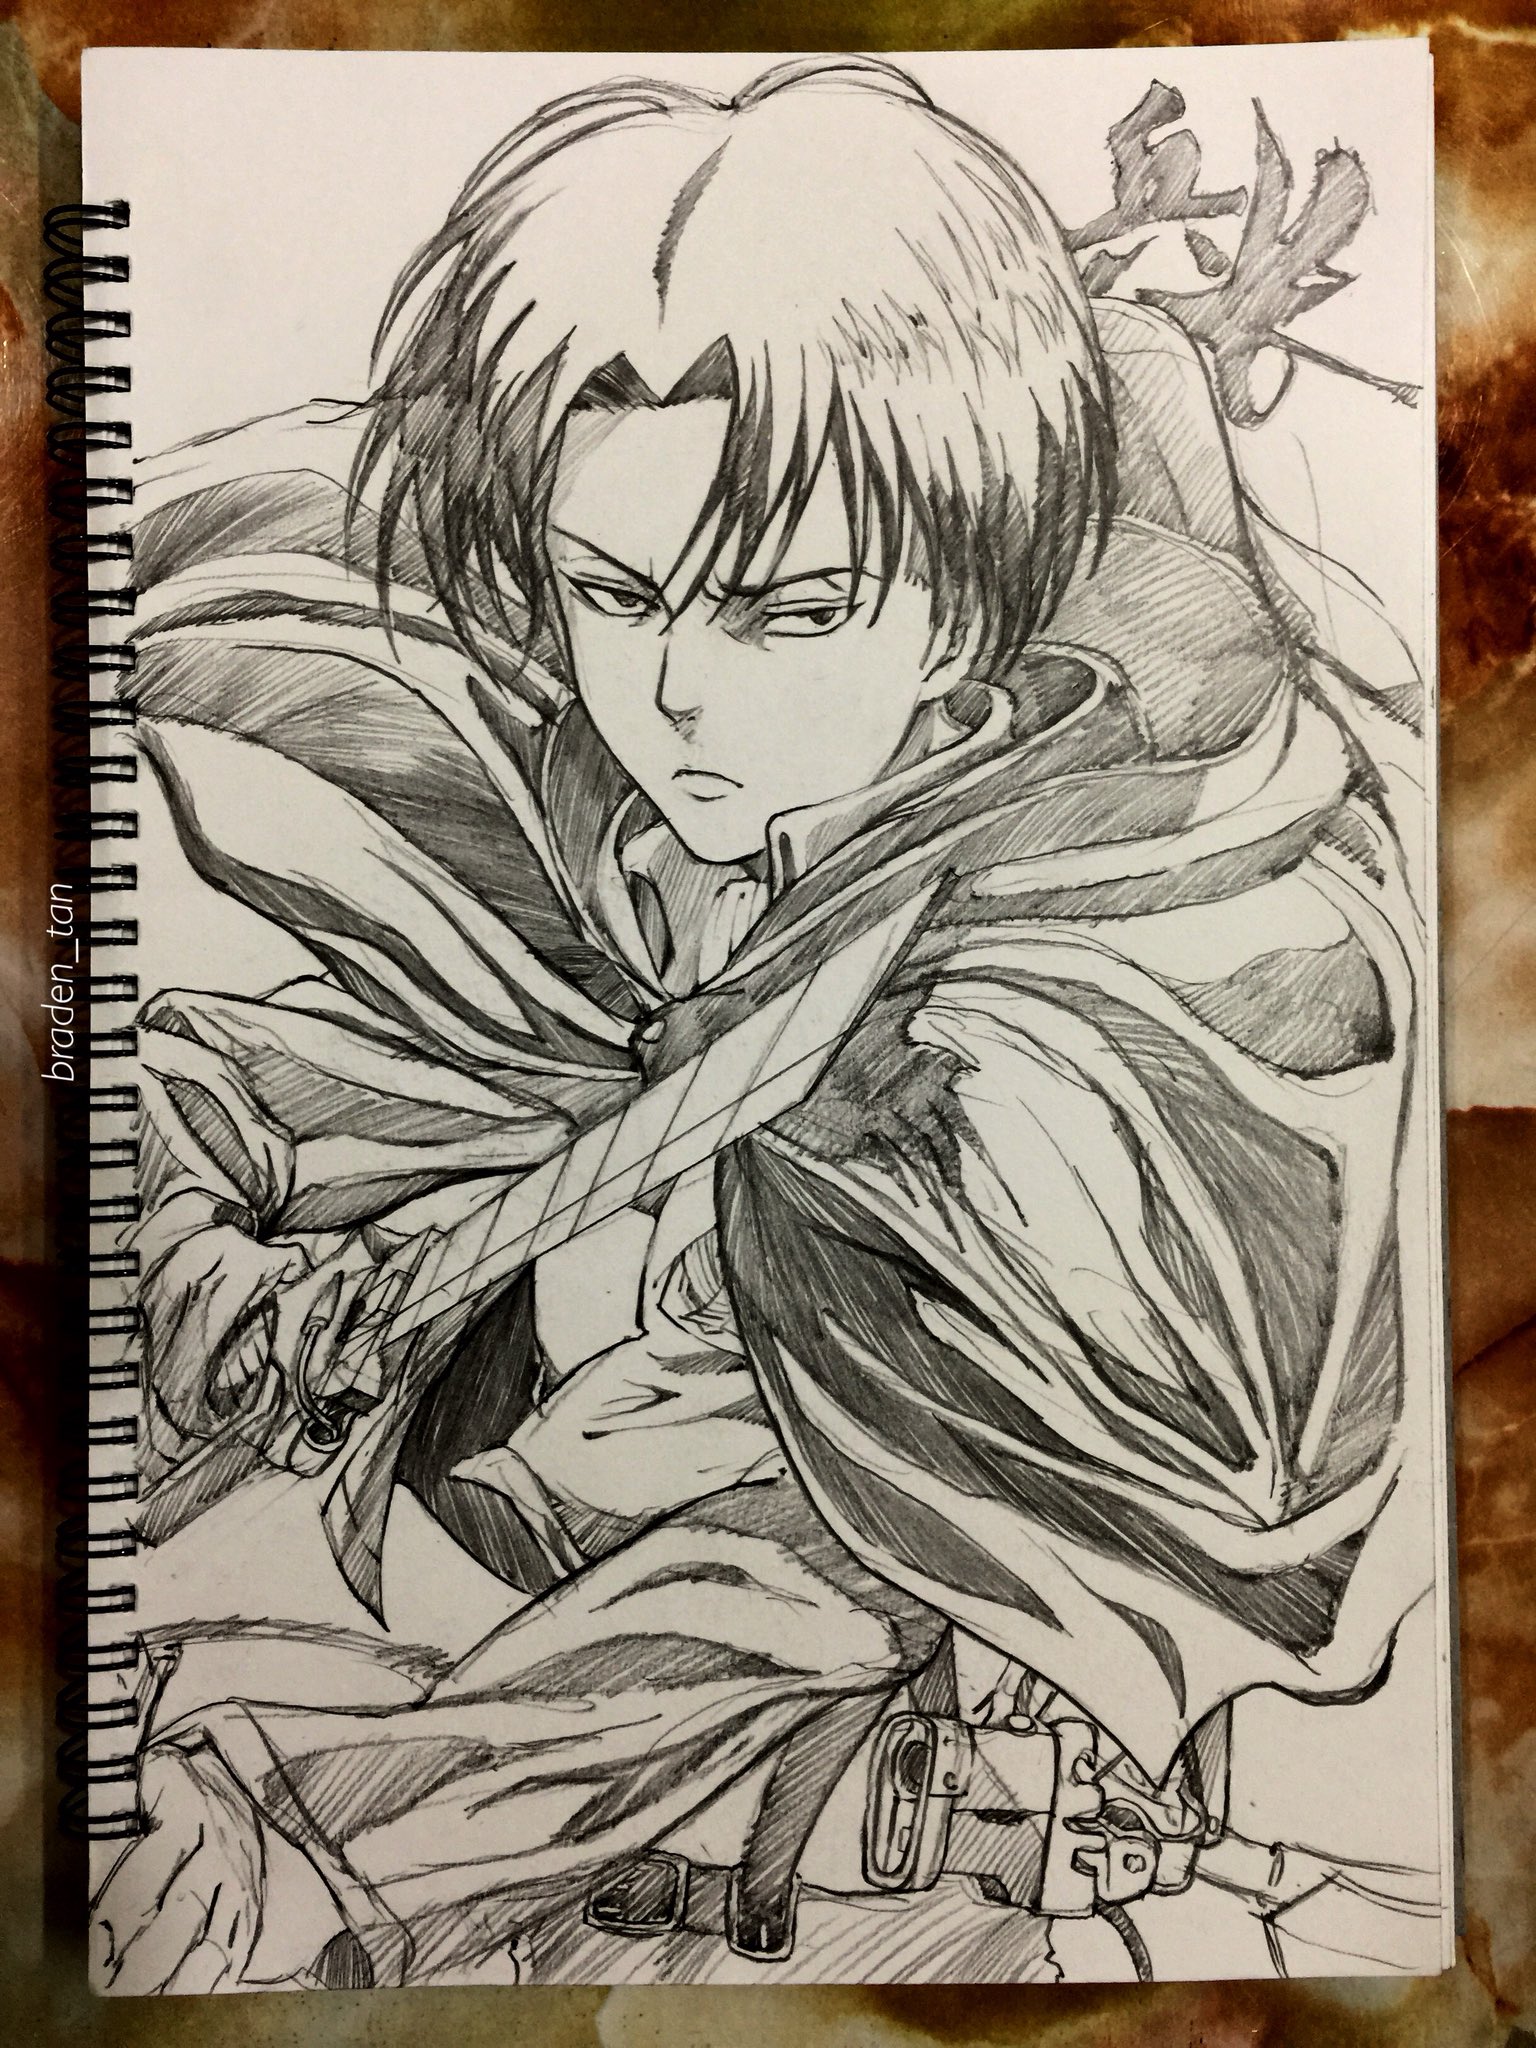 How To Draw Levi Ackerman  Step By Step  Storiespubcom Learn With Fun